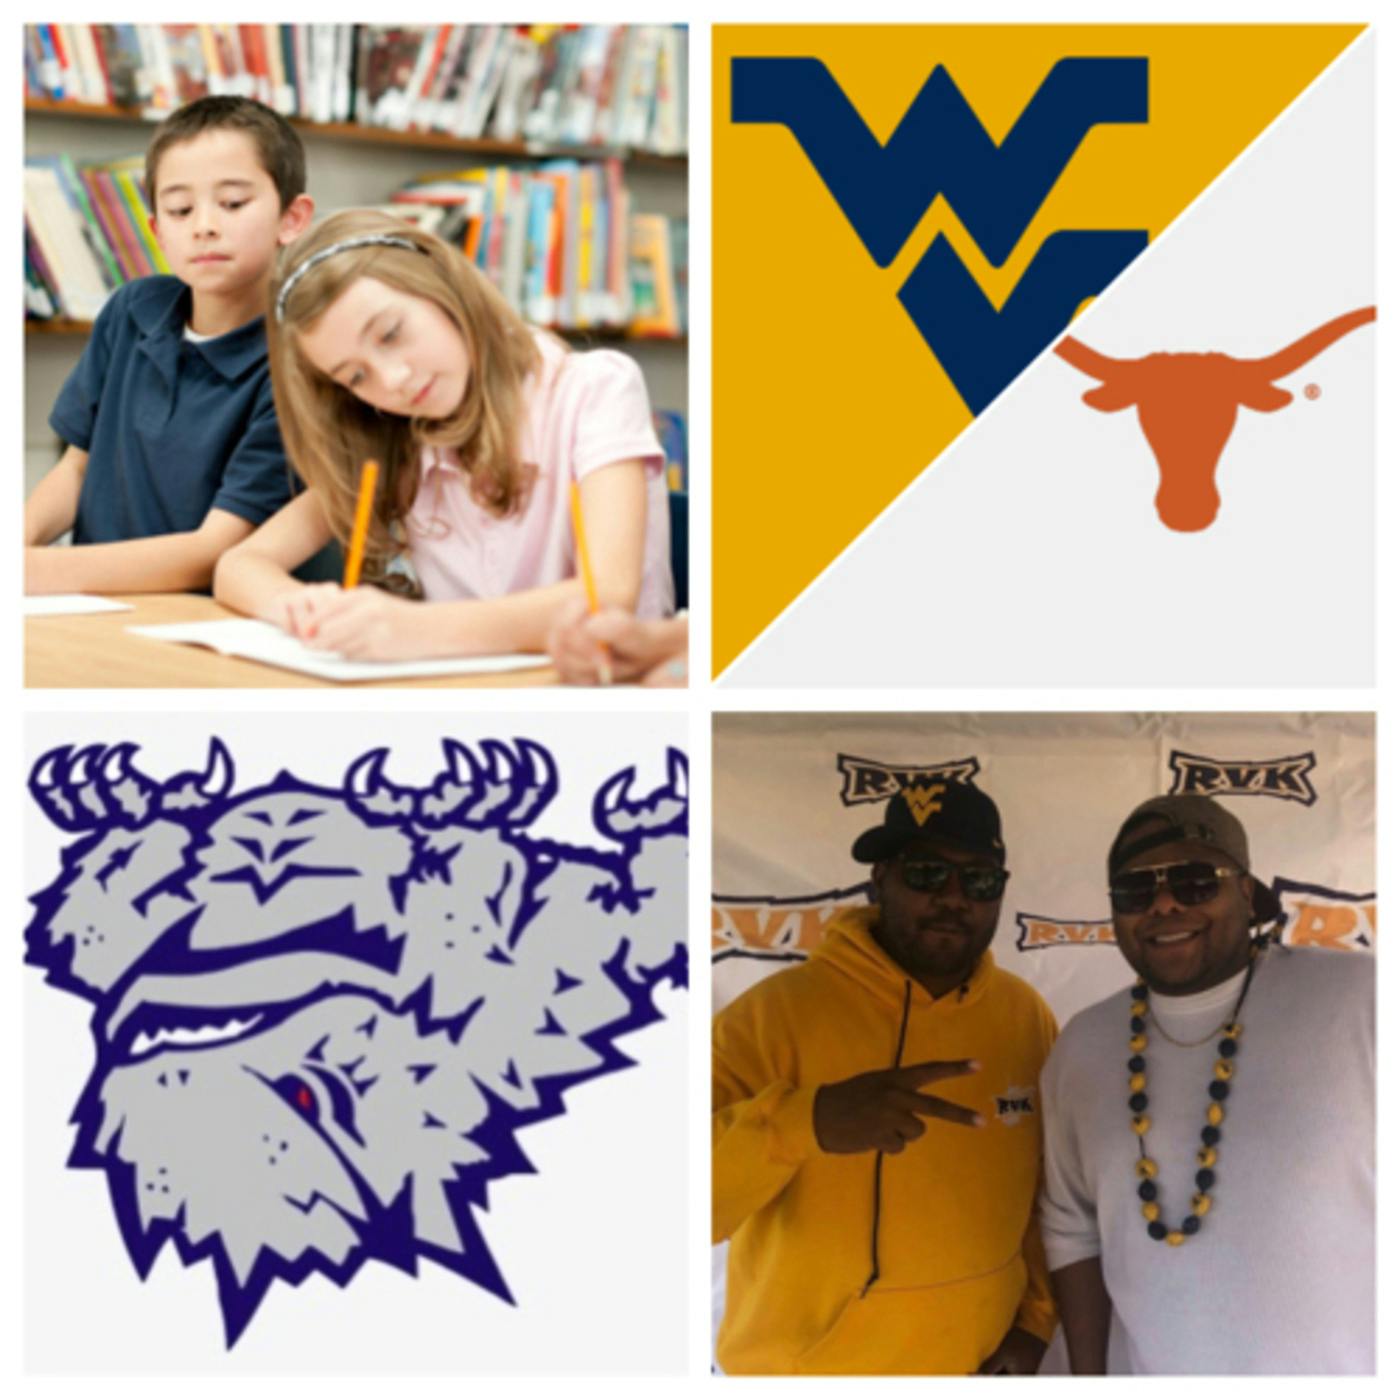 Ep. 185 - Cheating in School, Texas Review, and TCU